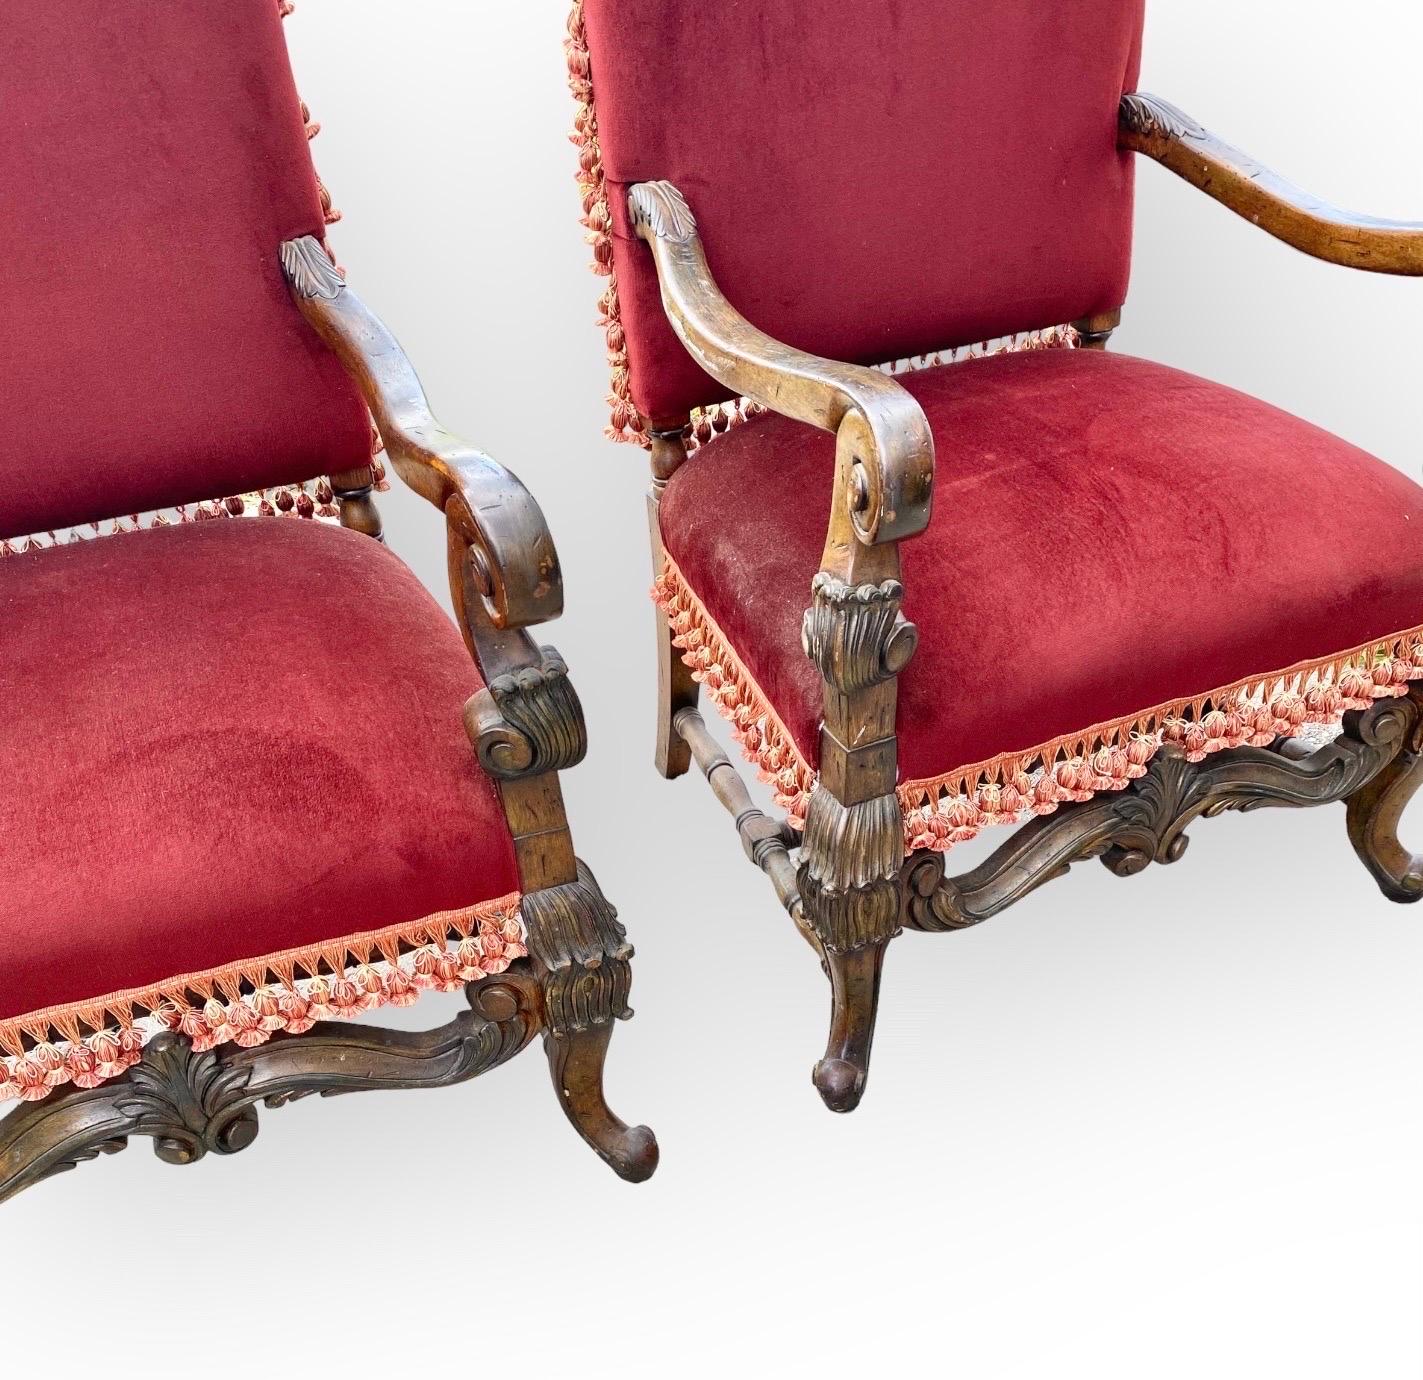 Pair of carved French Louis XIII style Fauteuils or armchairs, with gracefully scrolled arms, high backs and generous seats (and seat heights of 20”) resulting in uncommon comfort.
The lower apron was pierce-carved in a stylized anthemion theme,